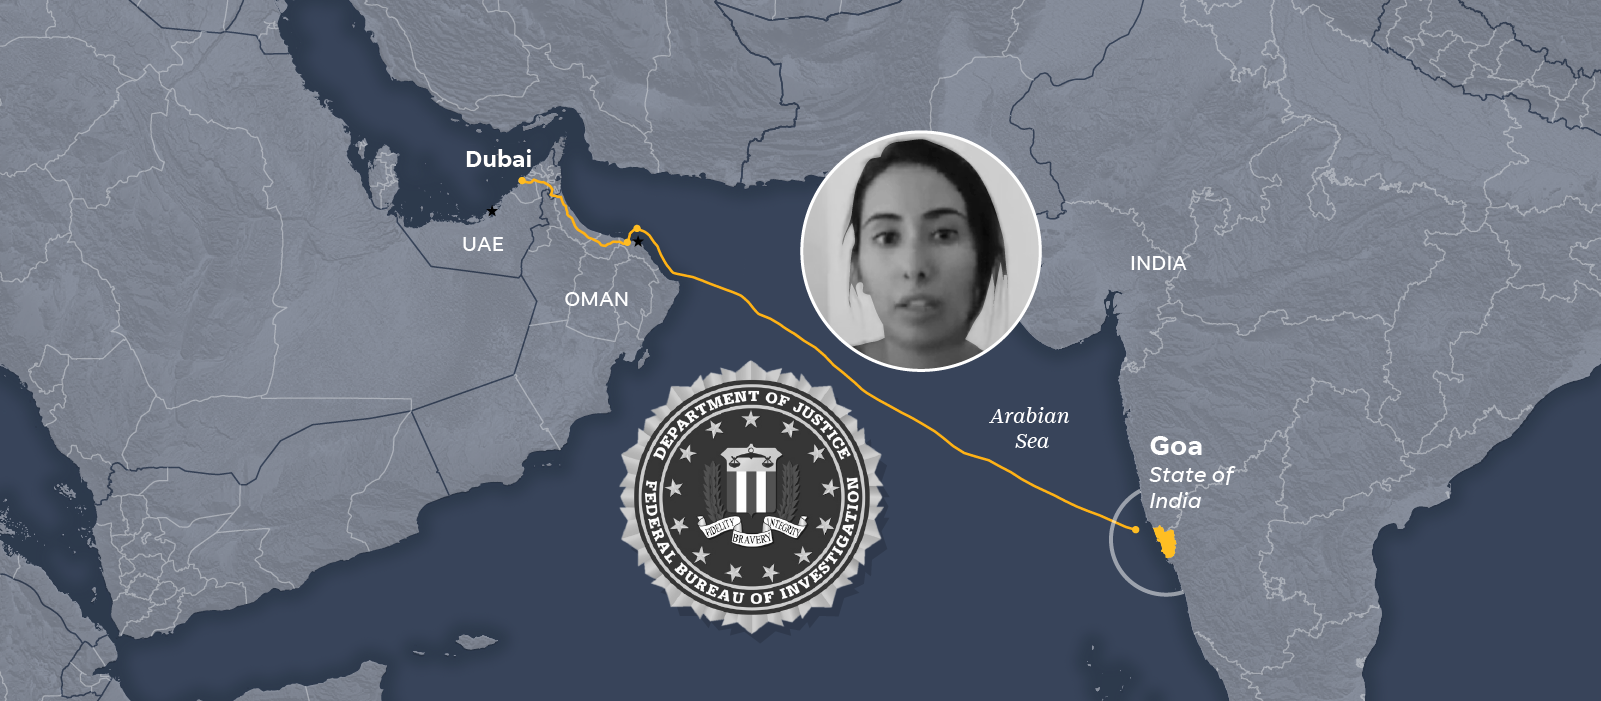 How the FBI played a role in the capture of Princess Latifa of Dubai